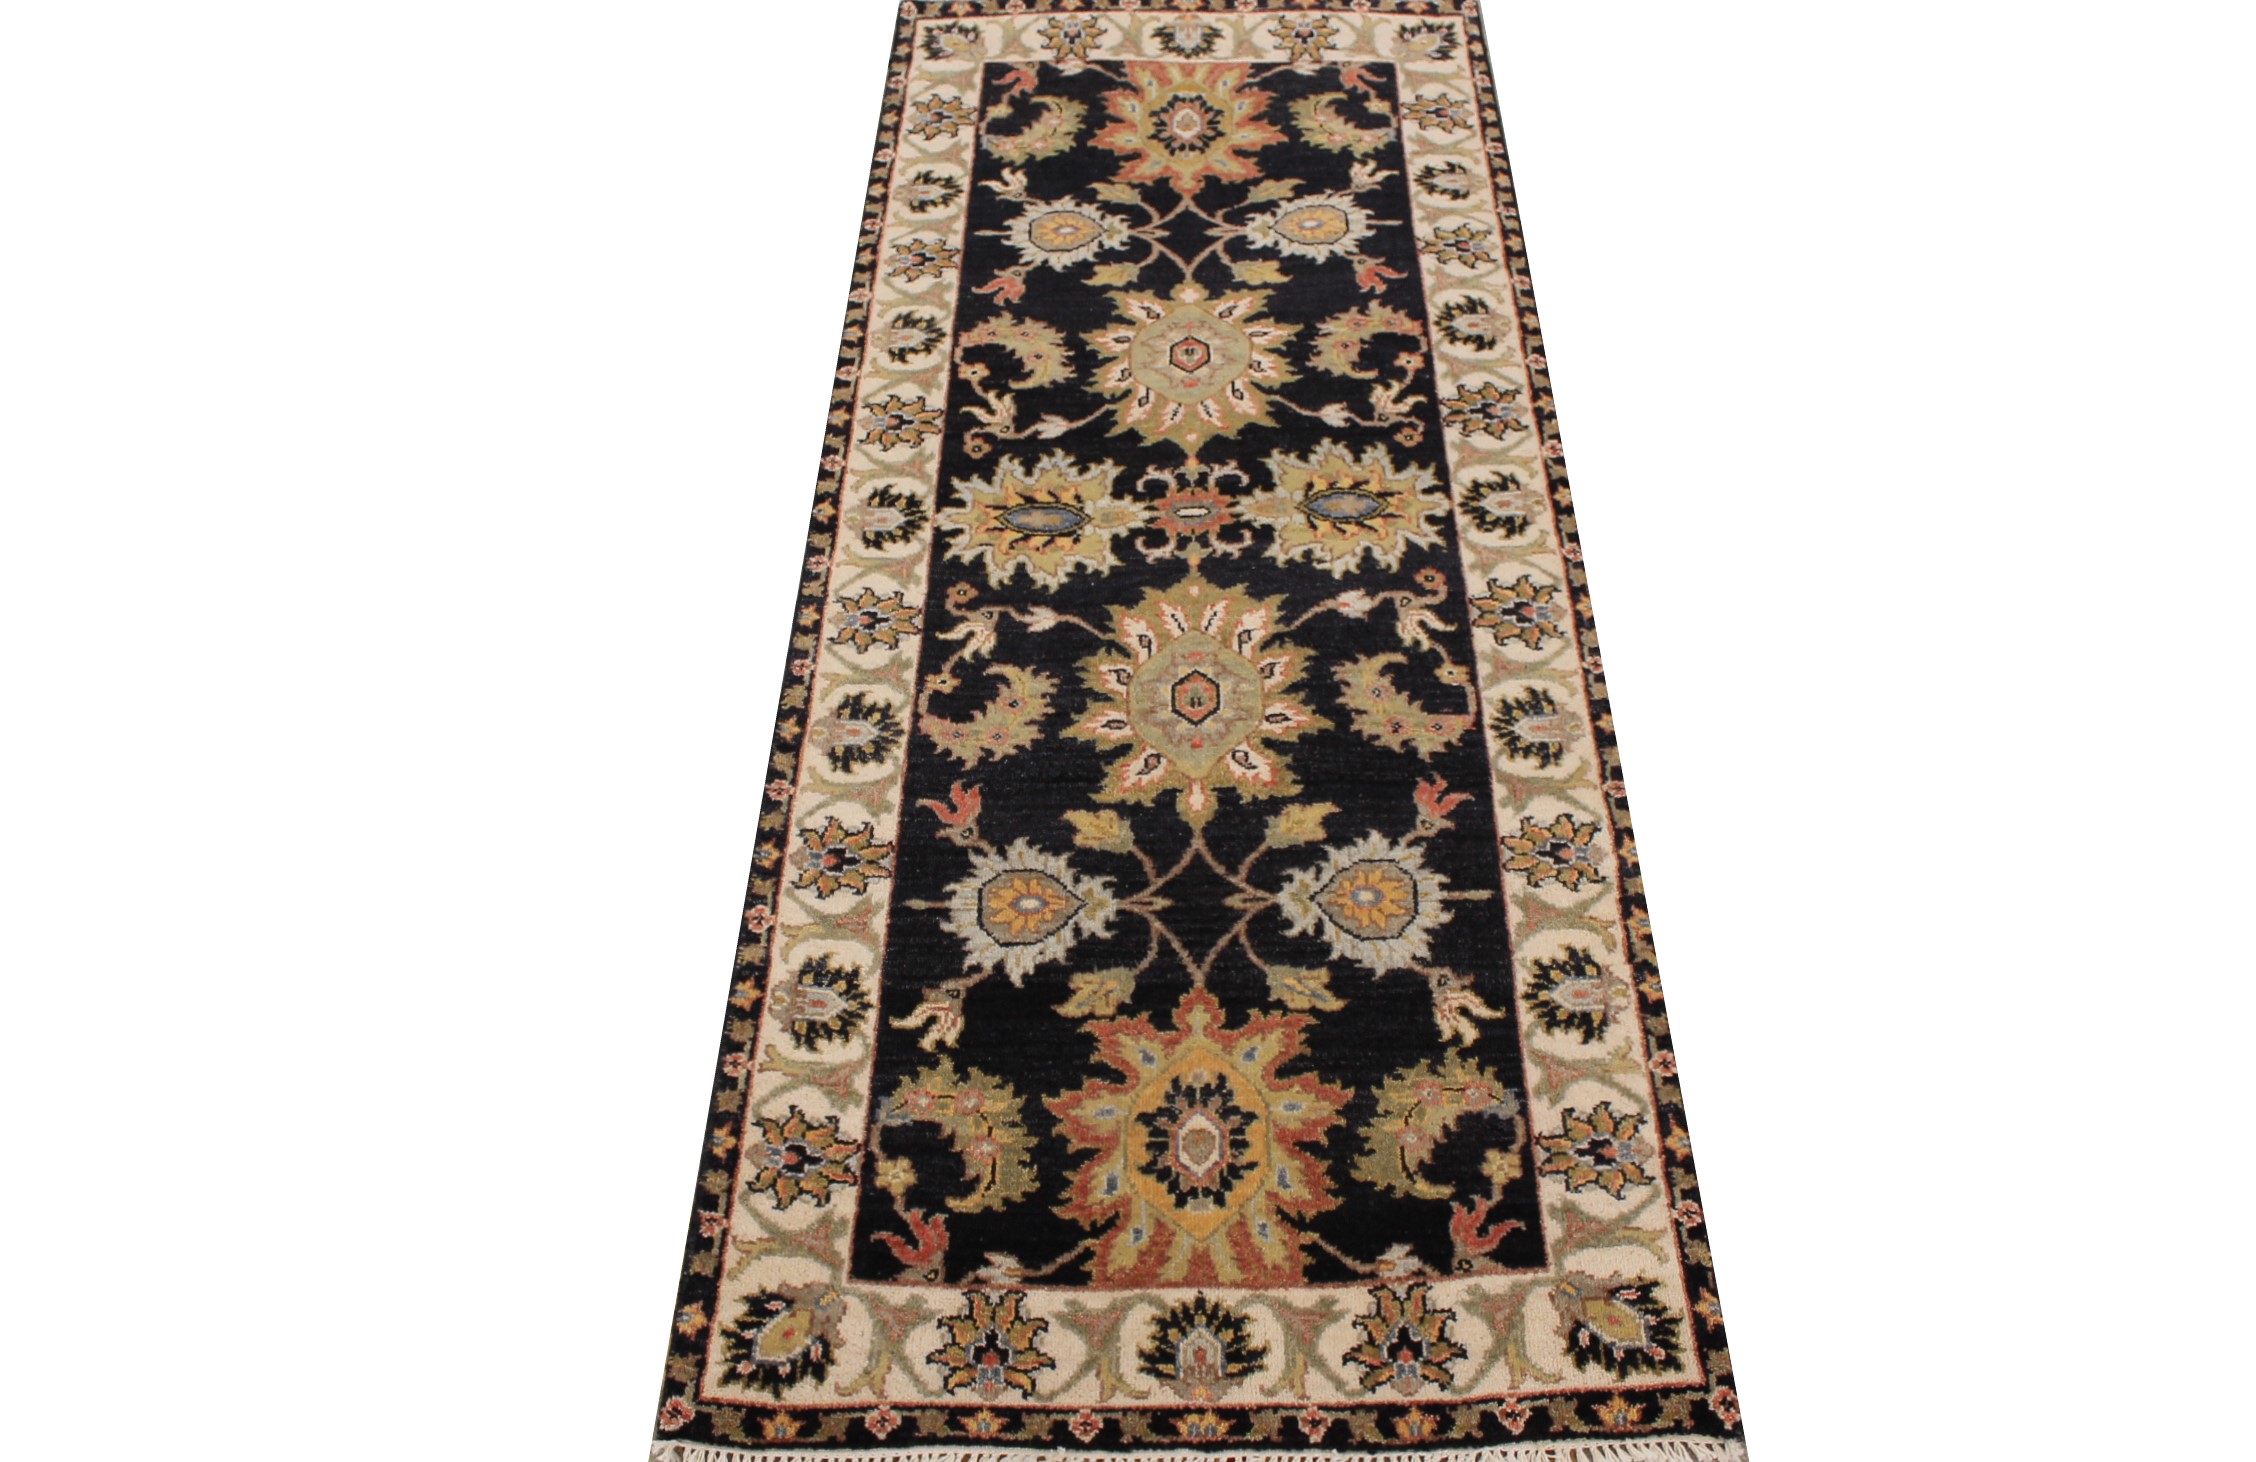 6 ft. Runner Oriental Hand Knotted Wool Area Rug - MR027387